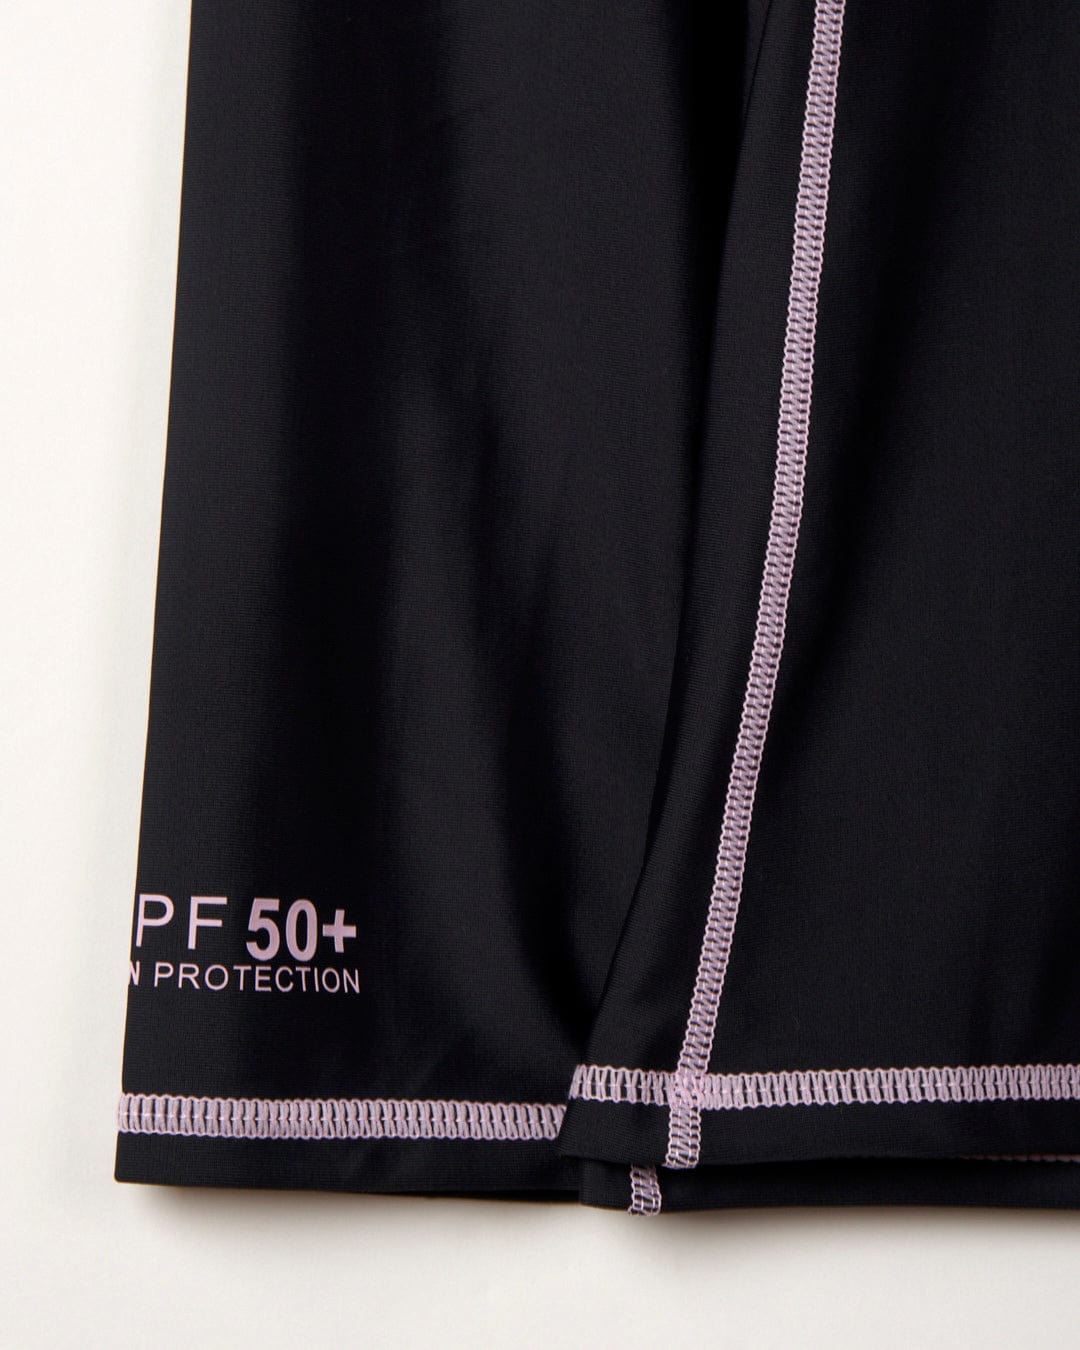 Close-up of Saltrock's Core - Recycled Women's Long Sleeve Rashvest in black fabric with "UPF 50 Protection" label and purple flat locked stitching.